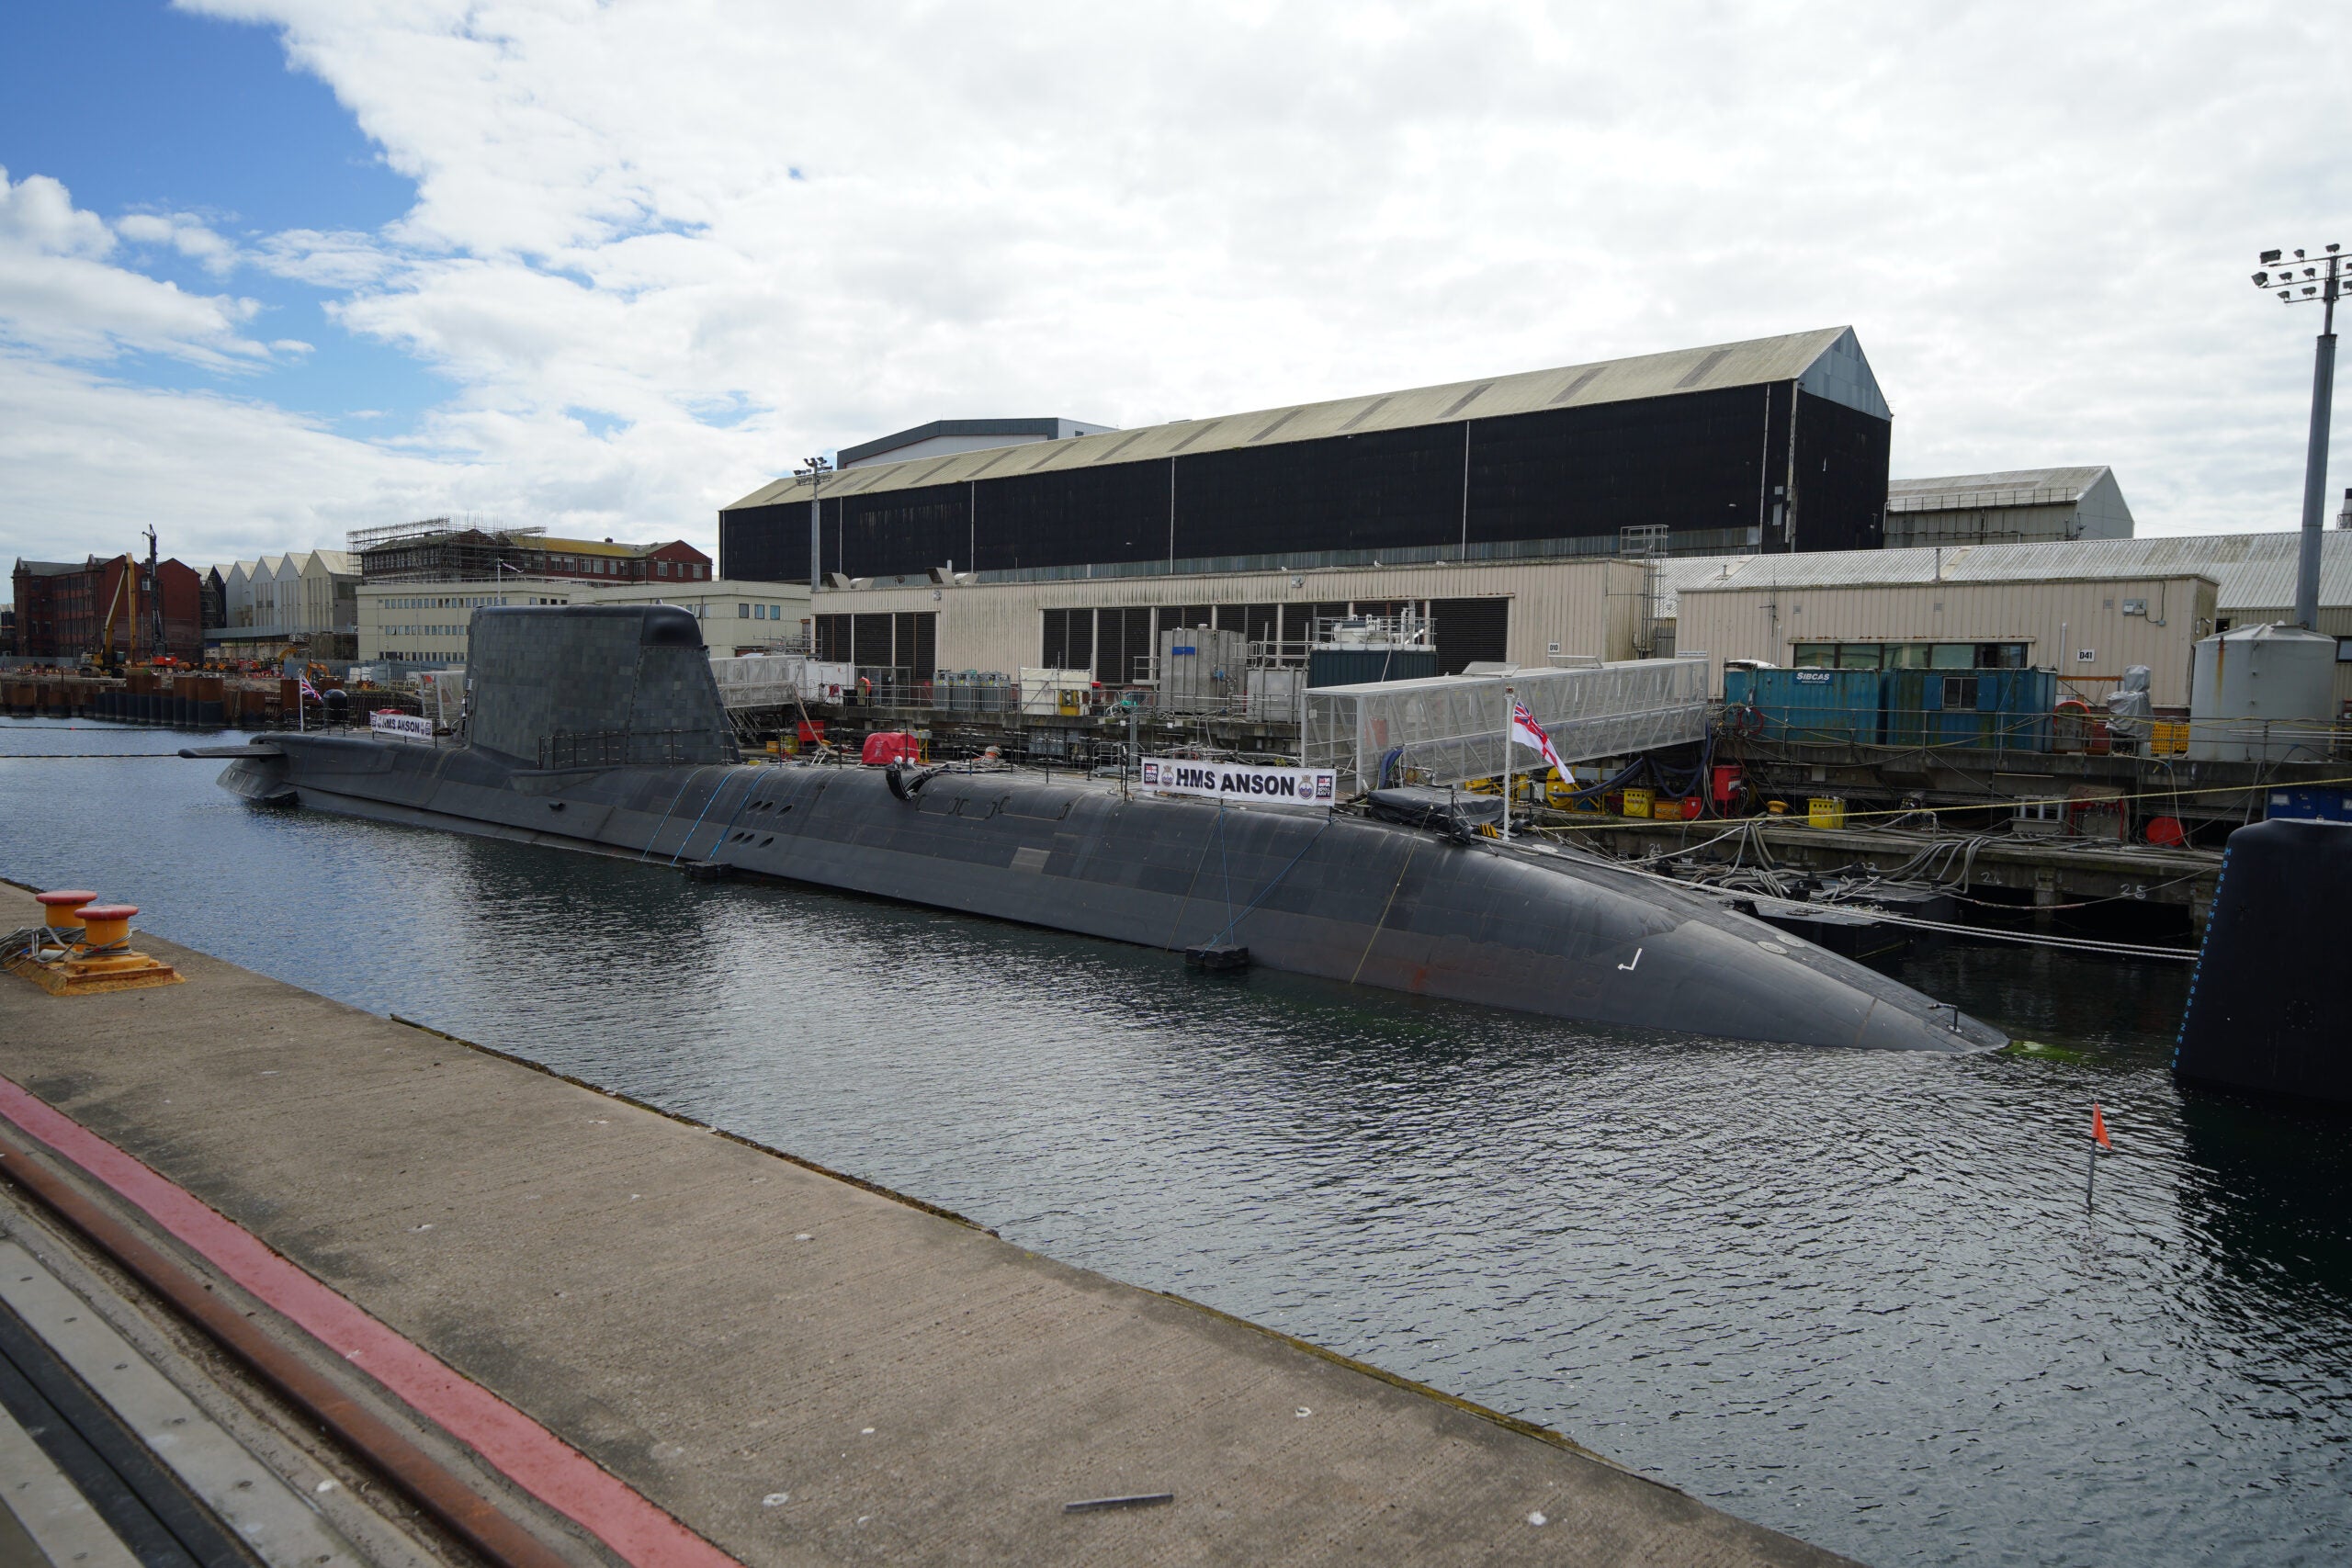 HMS Anson docked at BAE systems in Barrow-in-Furness before it is officially commissioned into the Royal Navy, as the UK's newest Astute-Class attack submarine, during a visit by Prime Minister Boris Johnson, Defence Secretary Ben Wallace and new Australian Deputy Prime Minister Richard Marles. Picture date: Wednesday August 31, 2022. (Photo by Peter Byrne/PA Images via Getty Images)